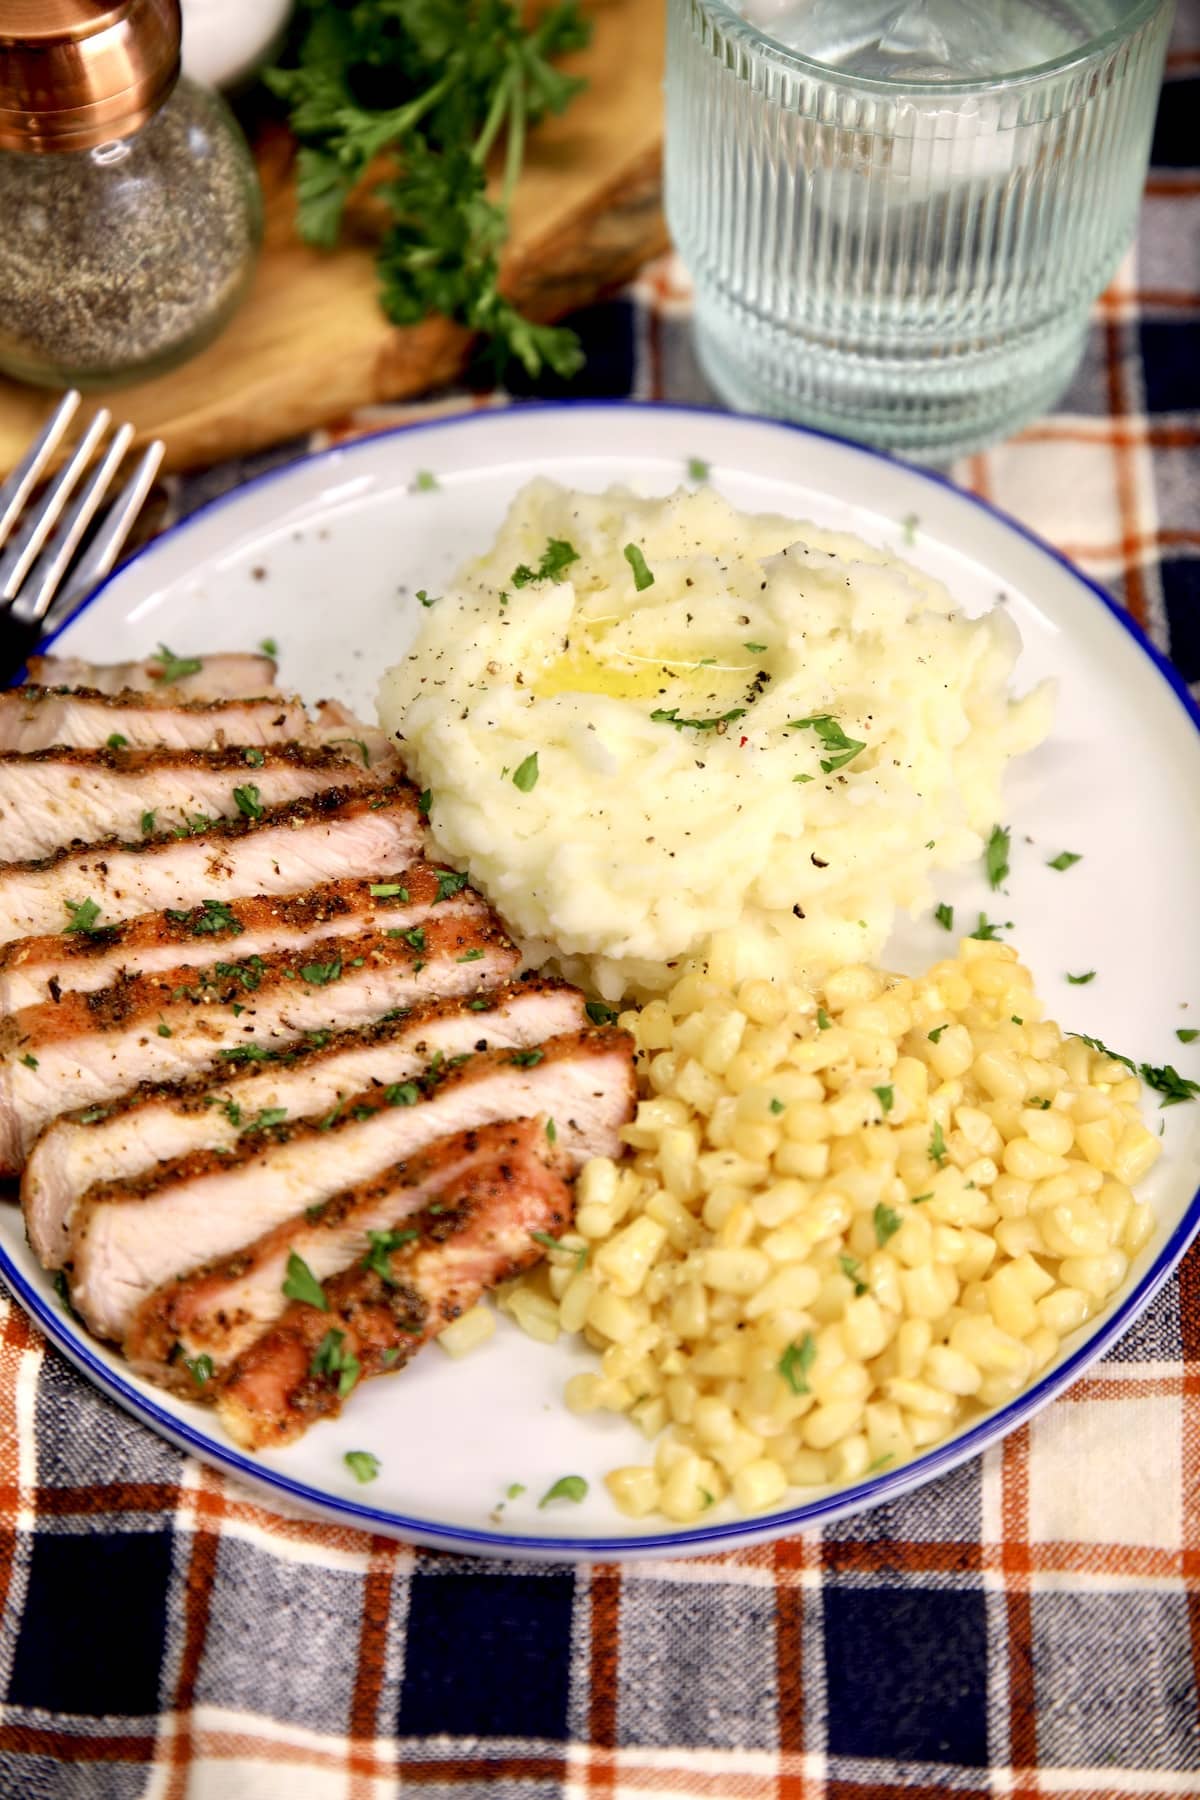 Plate of sliced pork chops with mashed potatoes and corn.